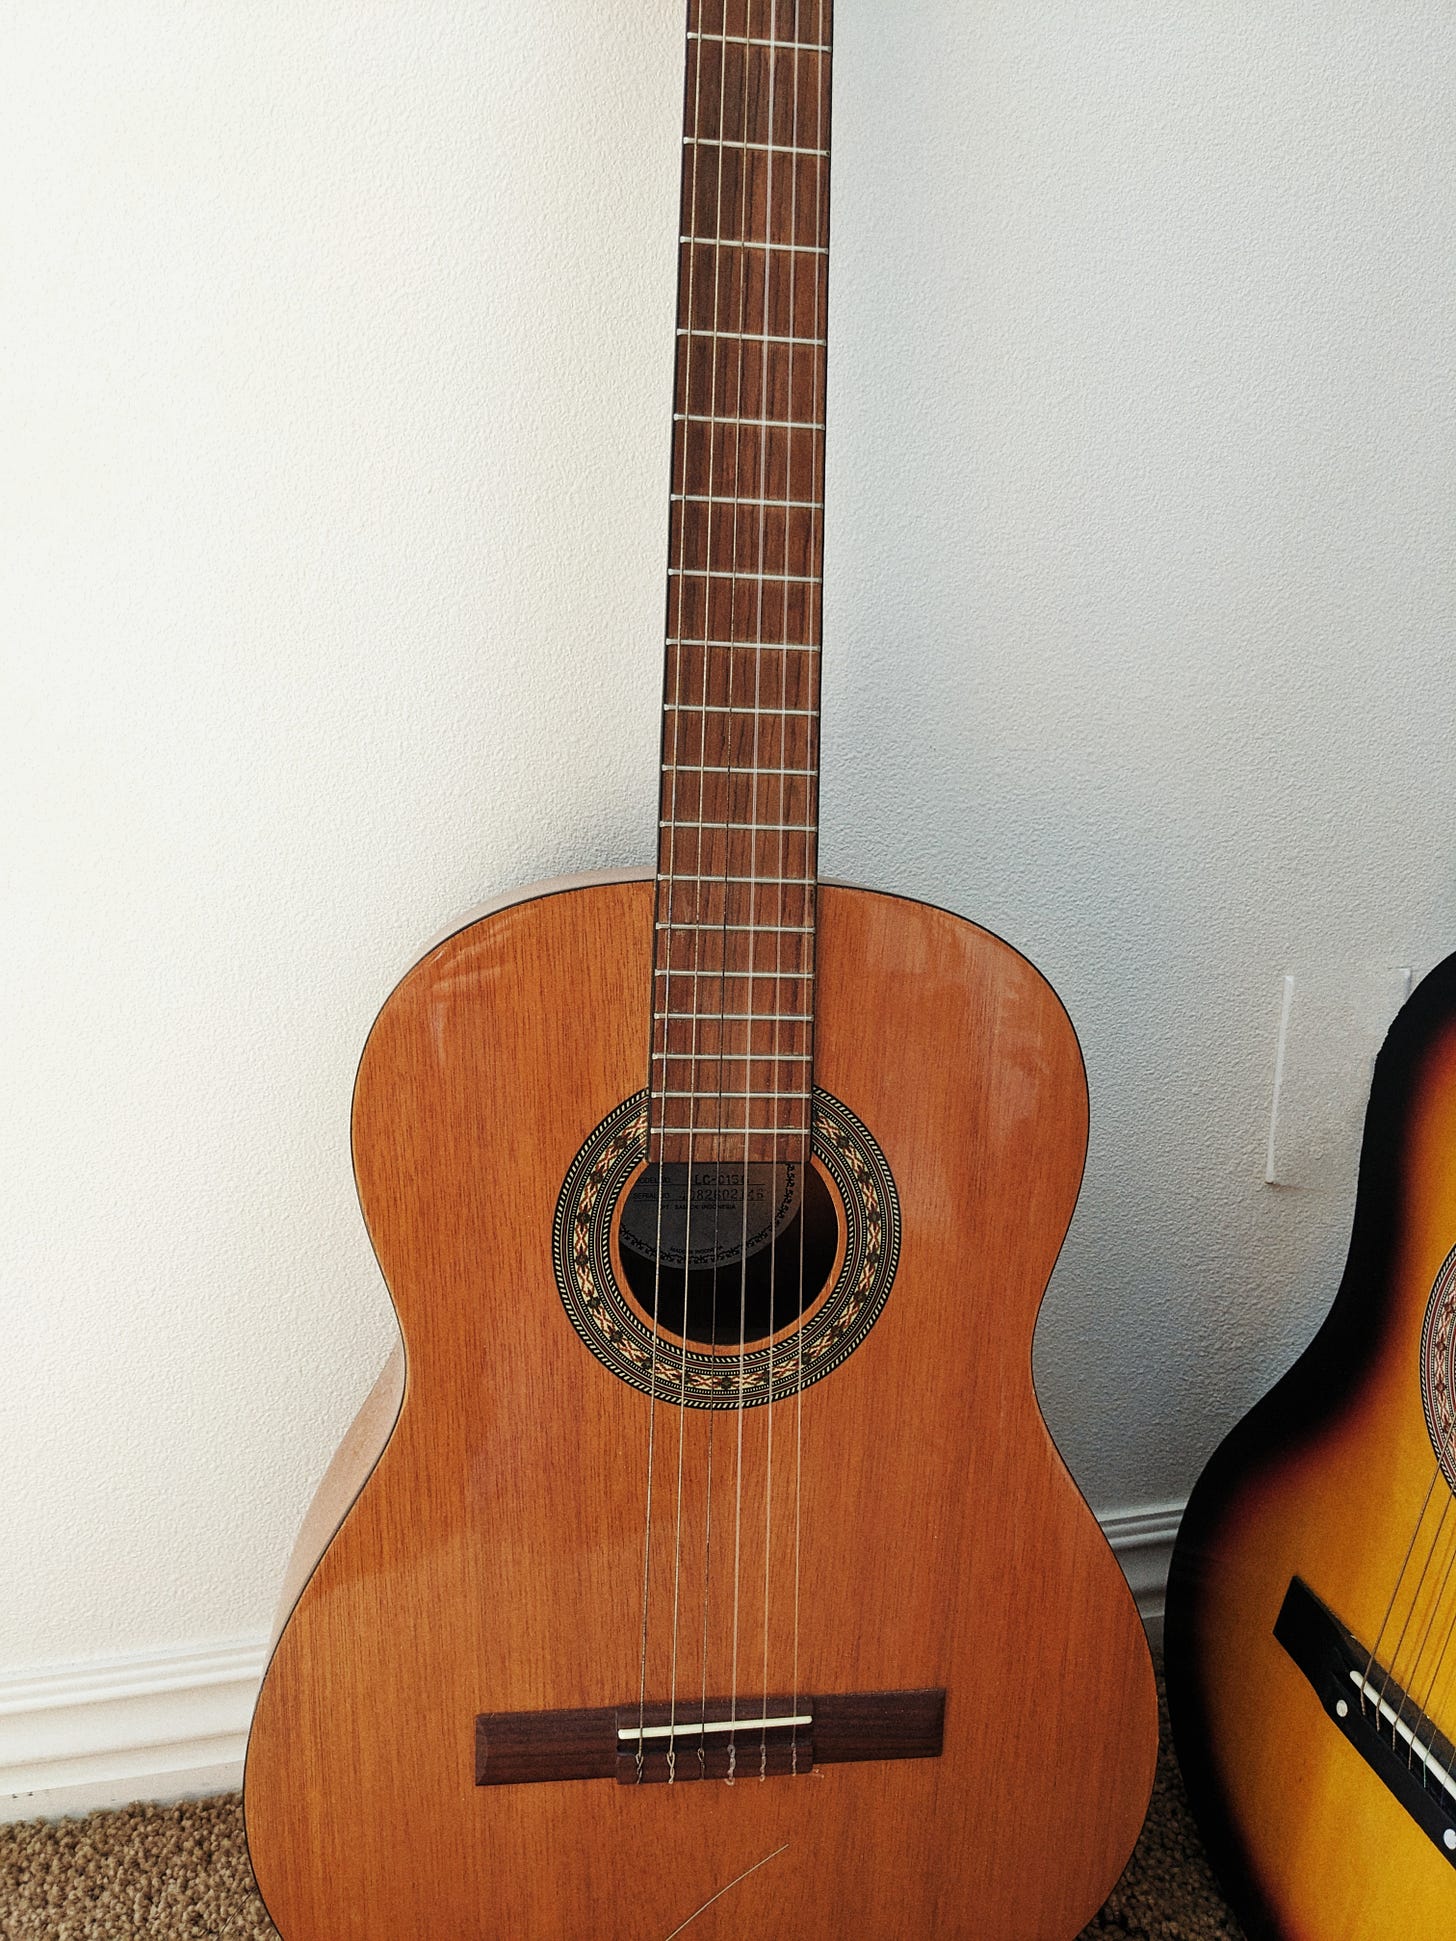 brother's classical guitar